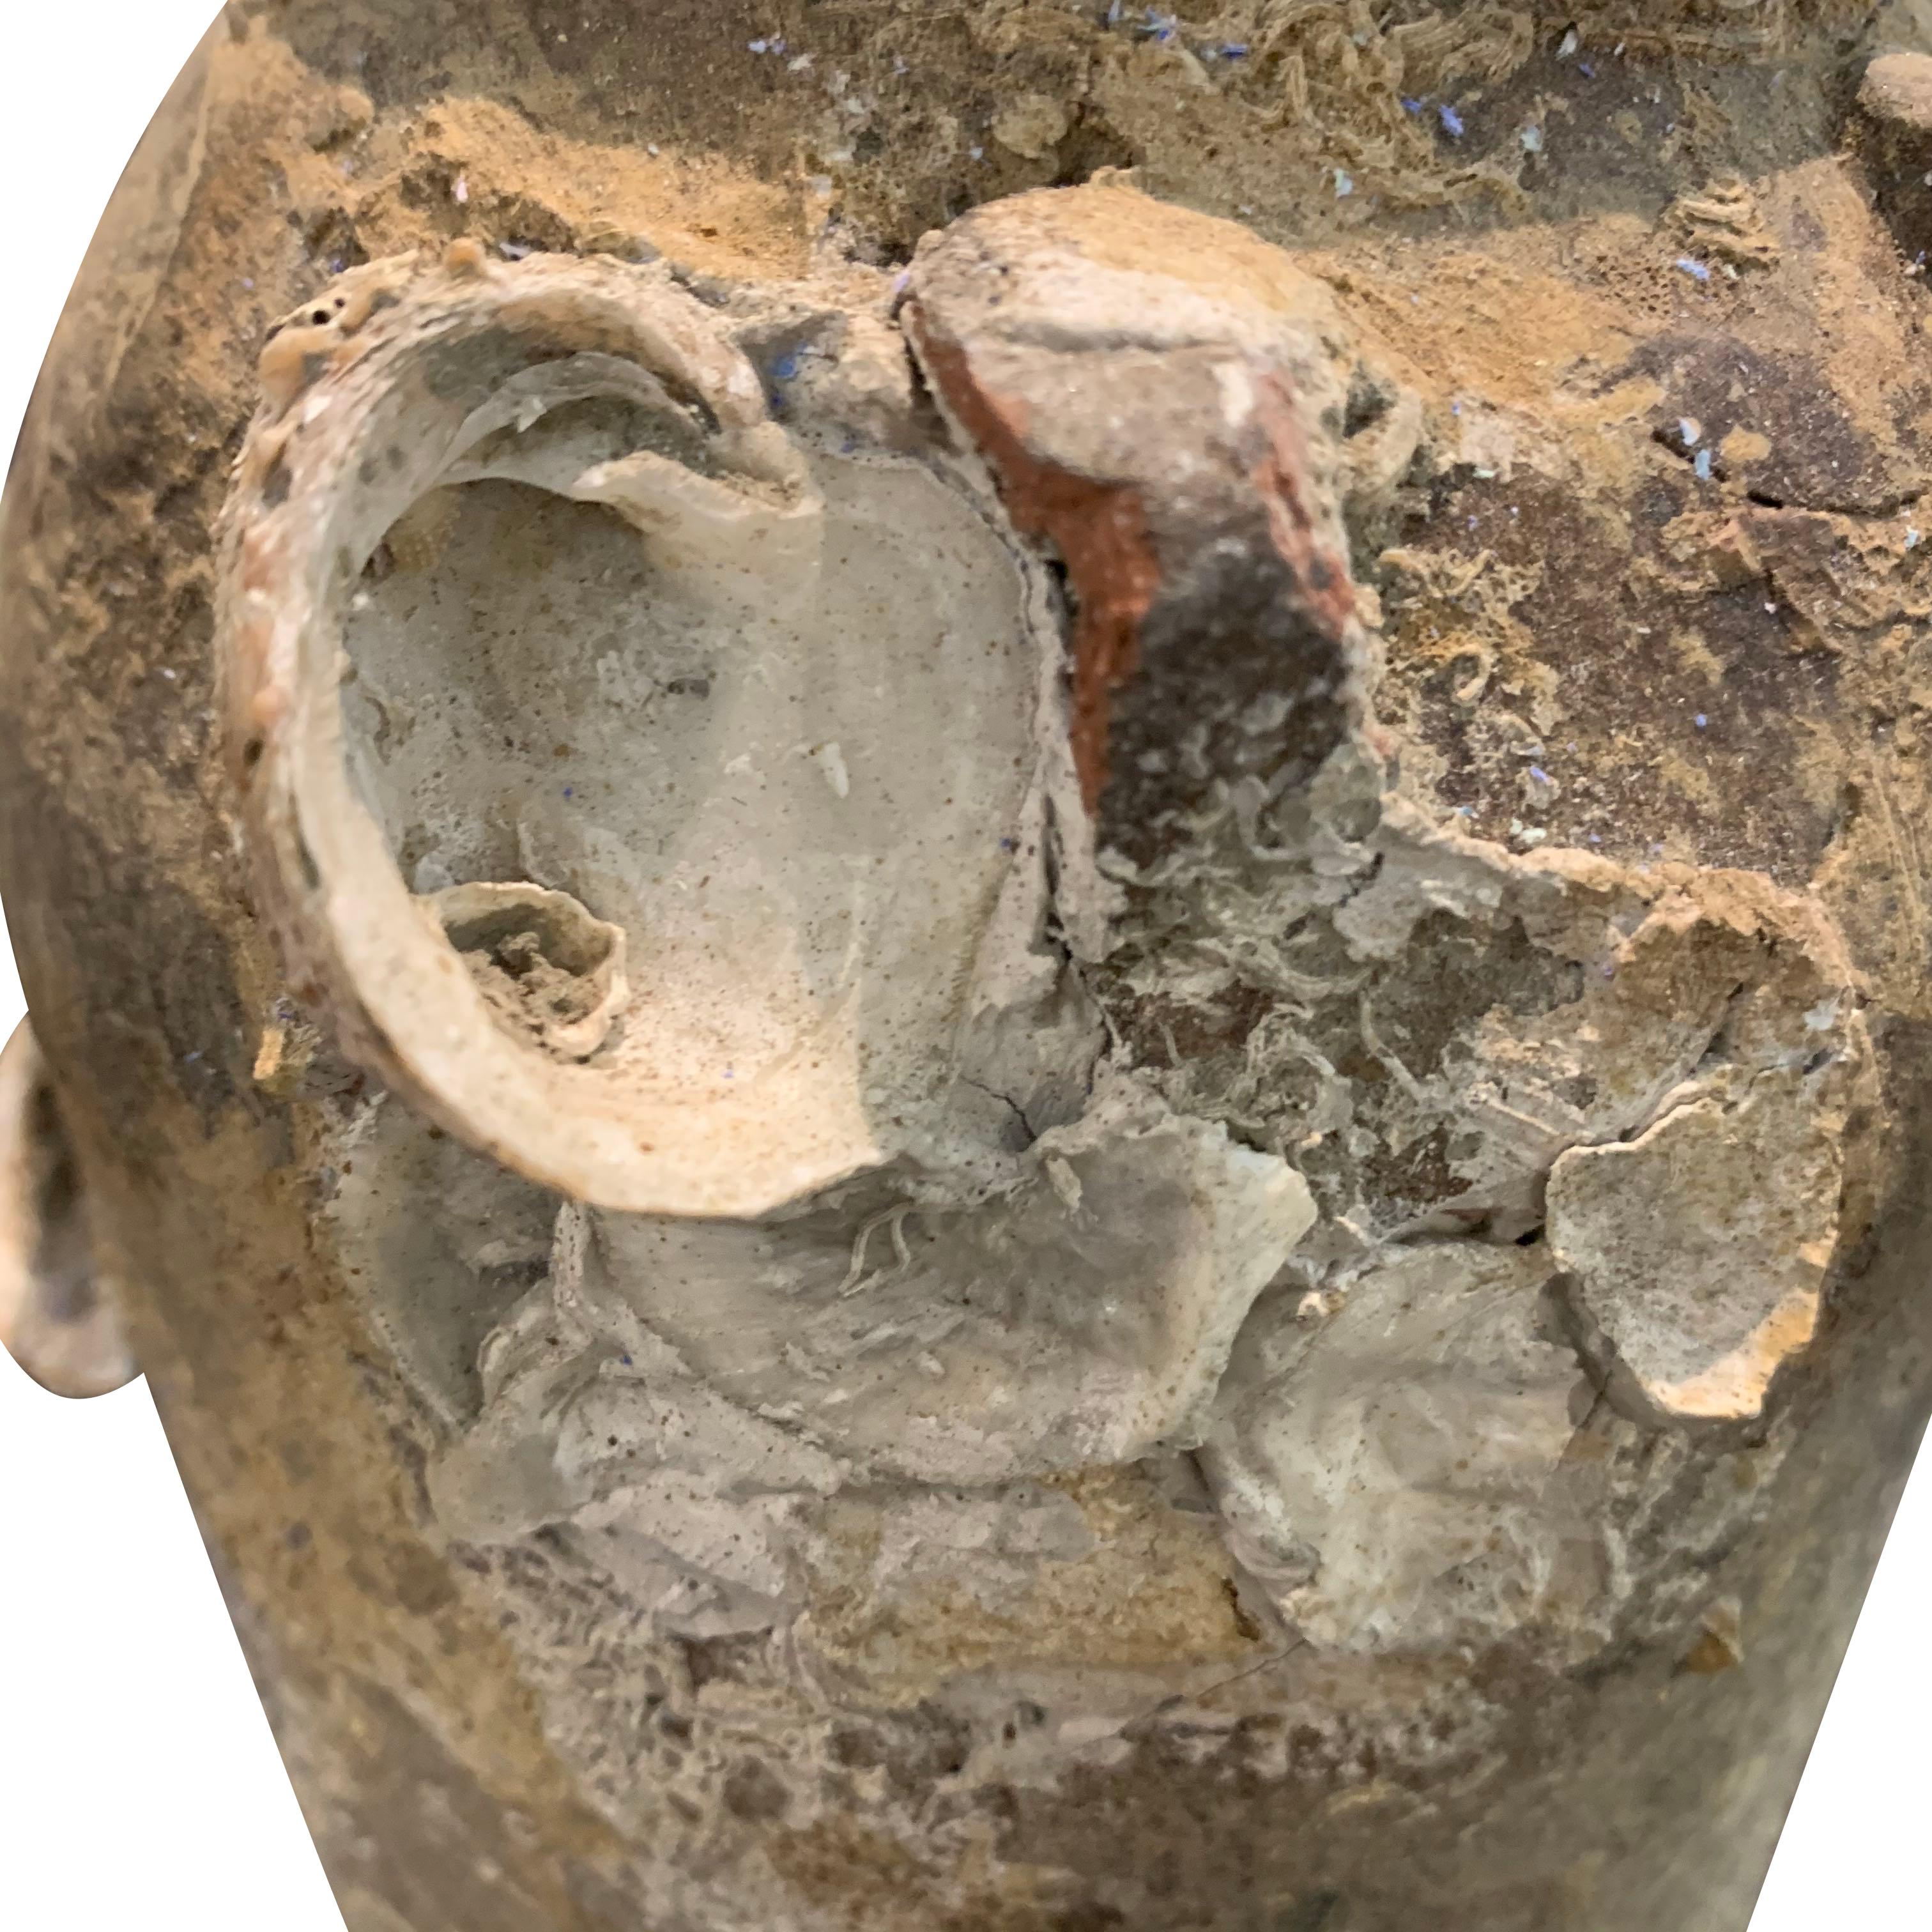 This 15th century China terracotta mussel jar from the Song dynasty is
ship wrecked and covered with barnacles.
The barnacles add interesting texture to the weathered patina.
We have a large collection of 15th and 16th century pots and vases.
  